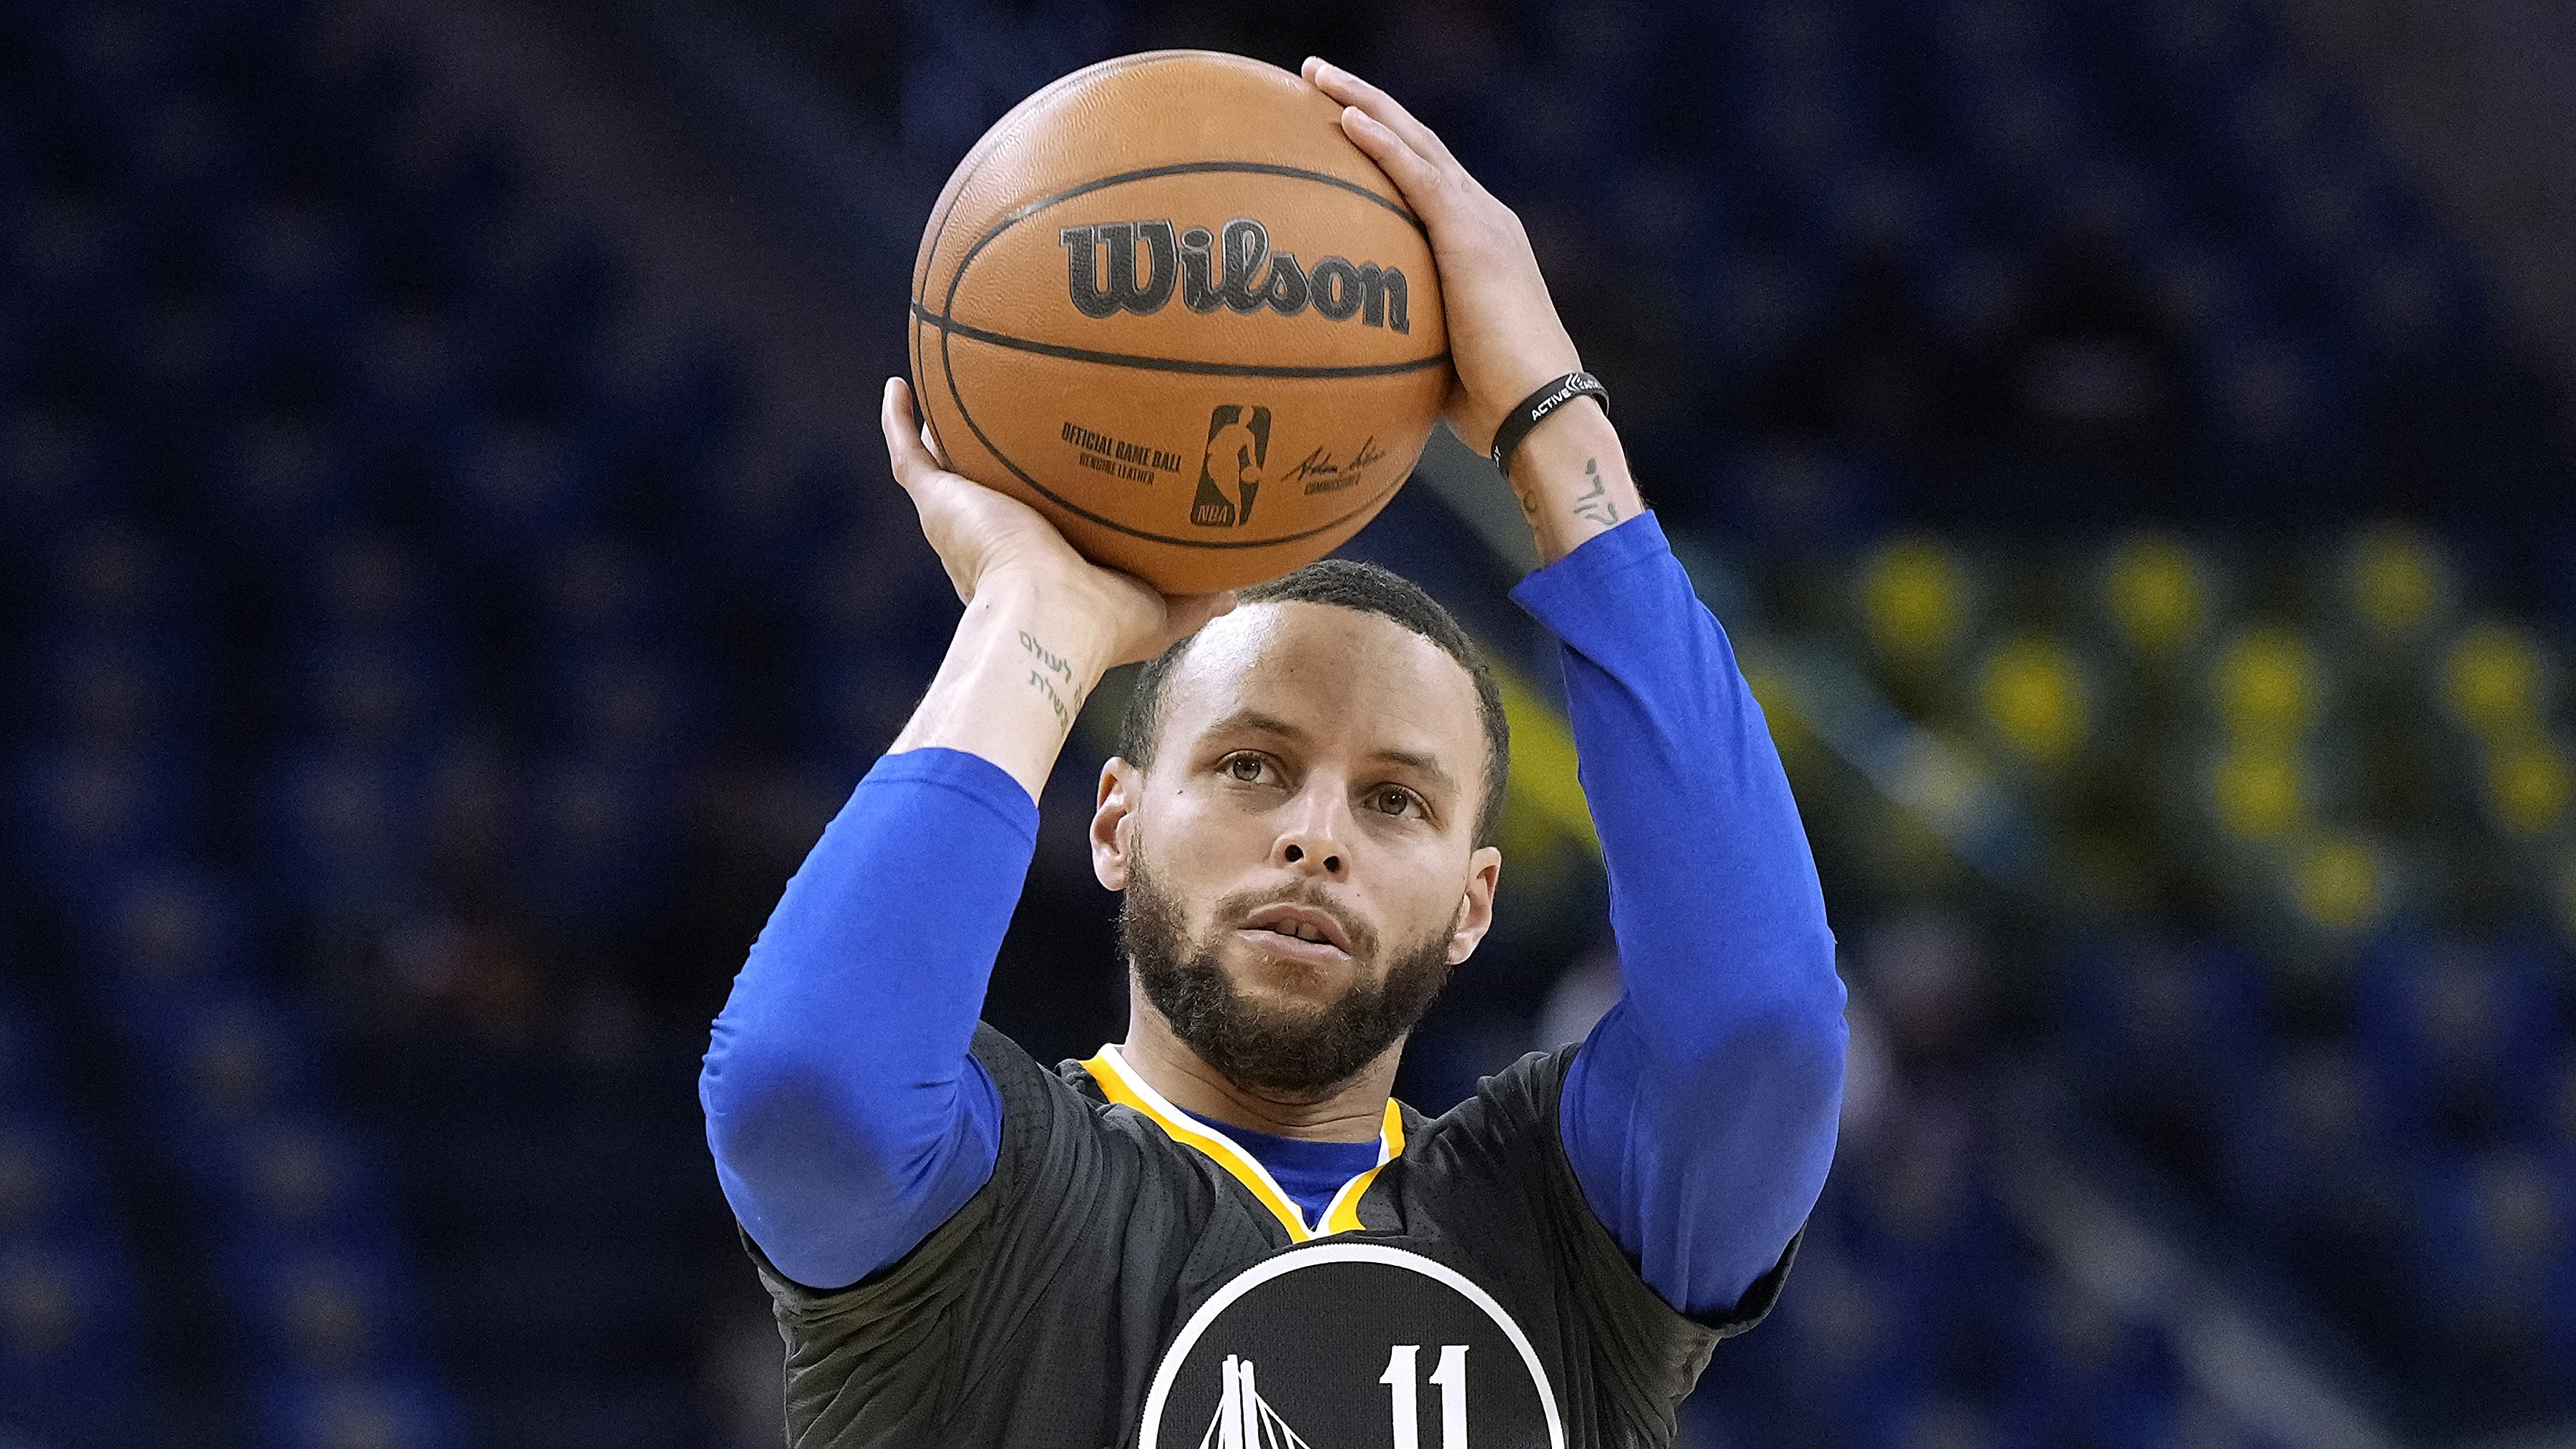 Stephen Curry has returned to MVP form - Sports Illustrated